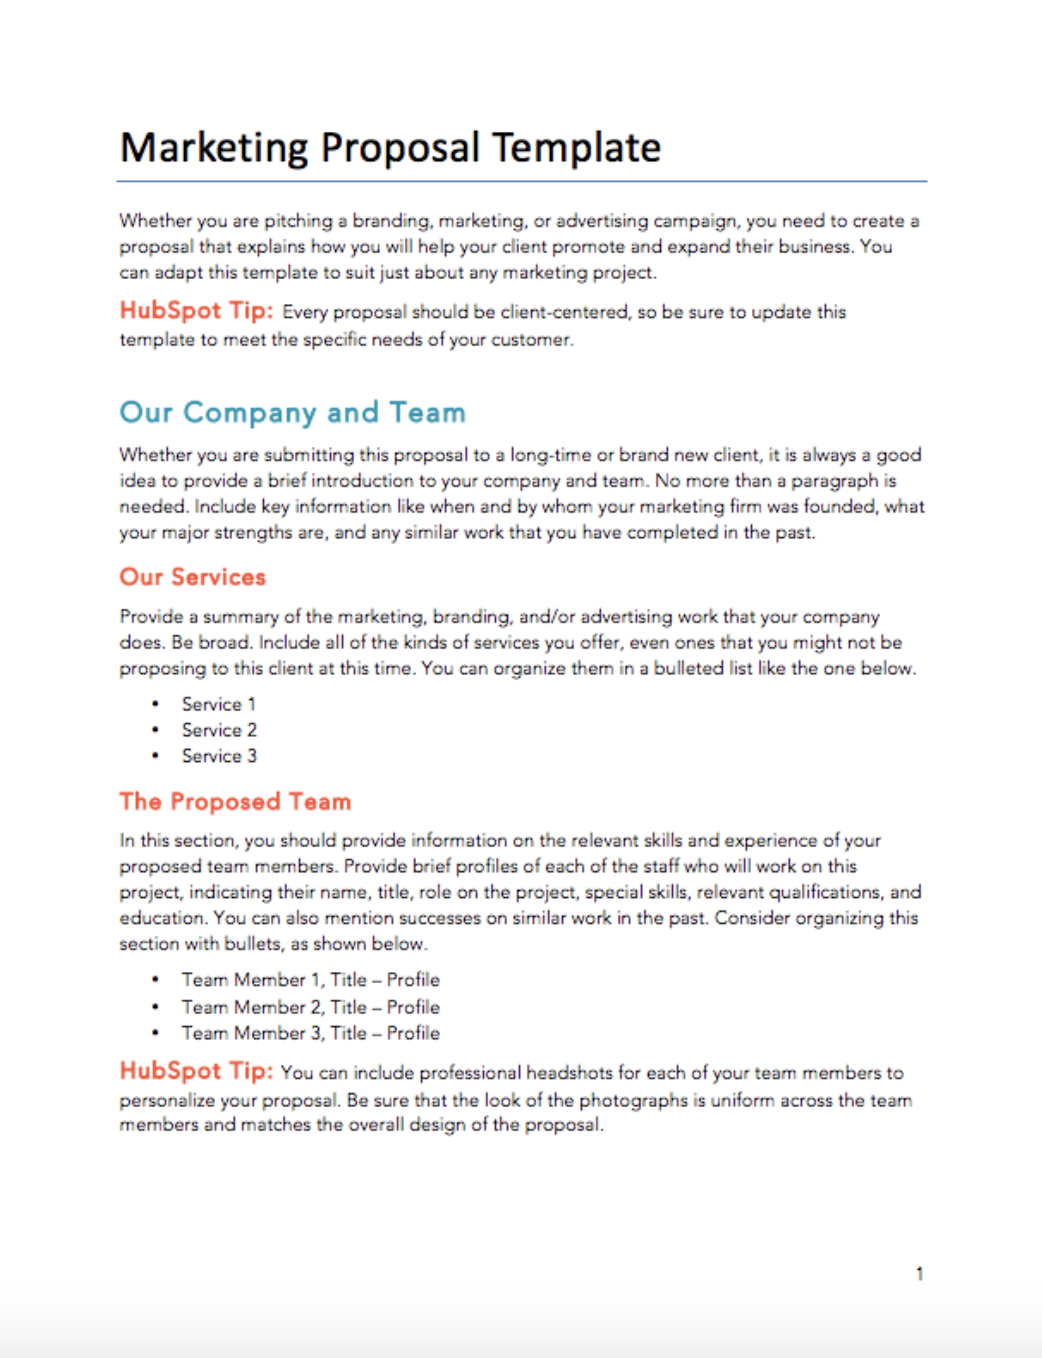 Free Marketing Proposal Template for PDF  Word  HubSpot In Advertising Proposal Template